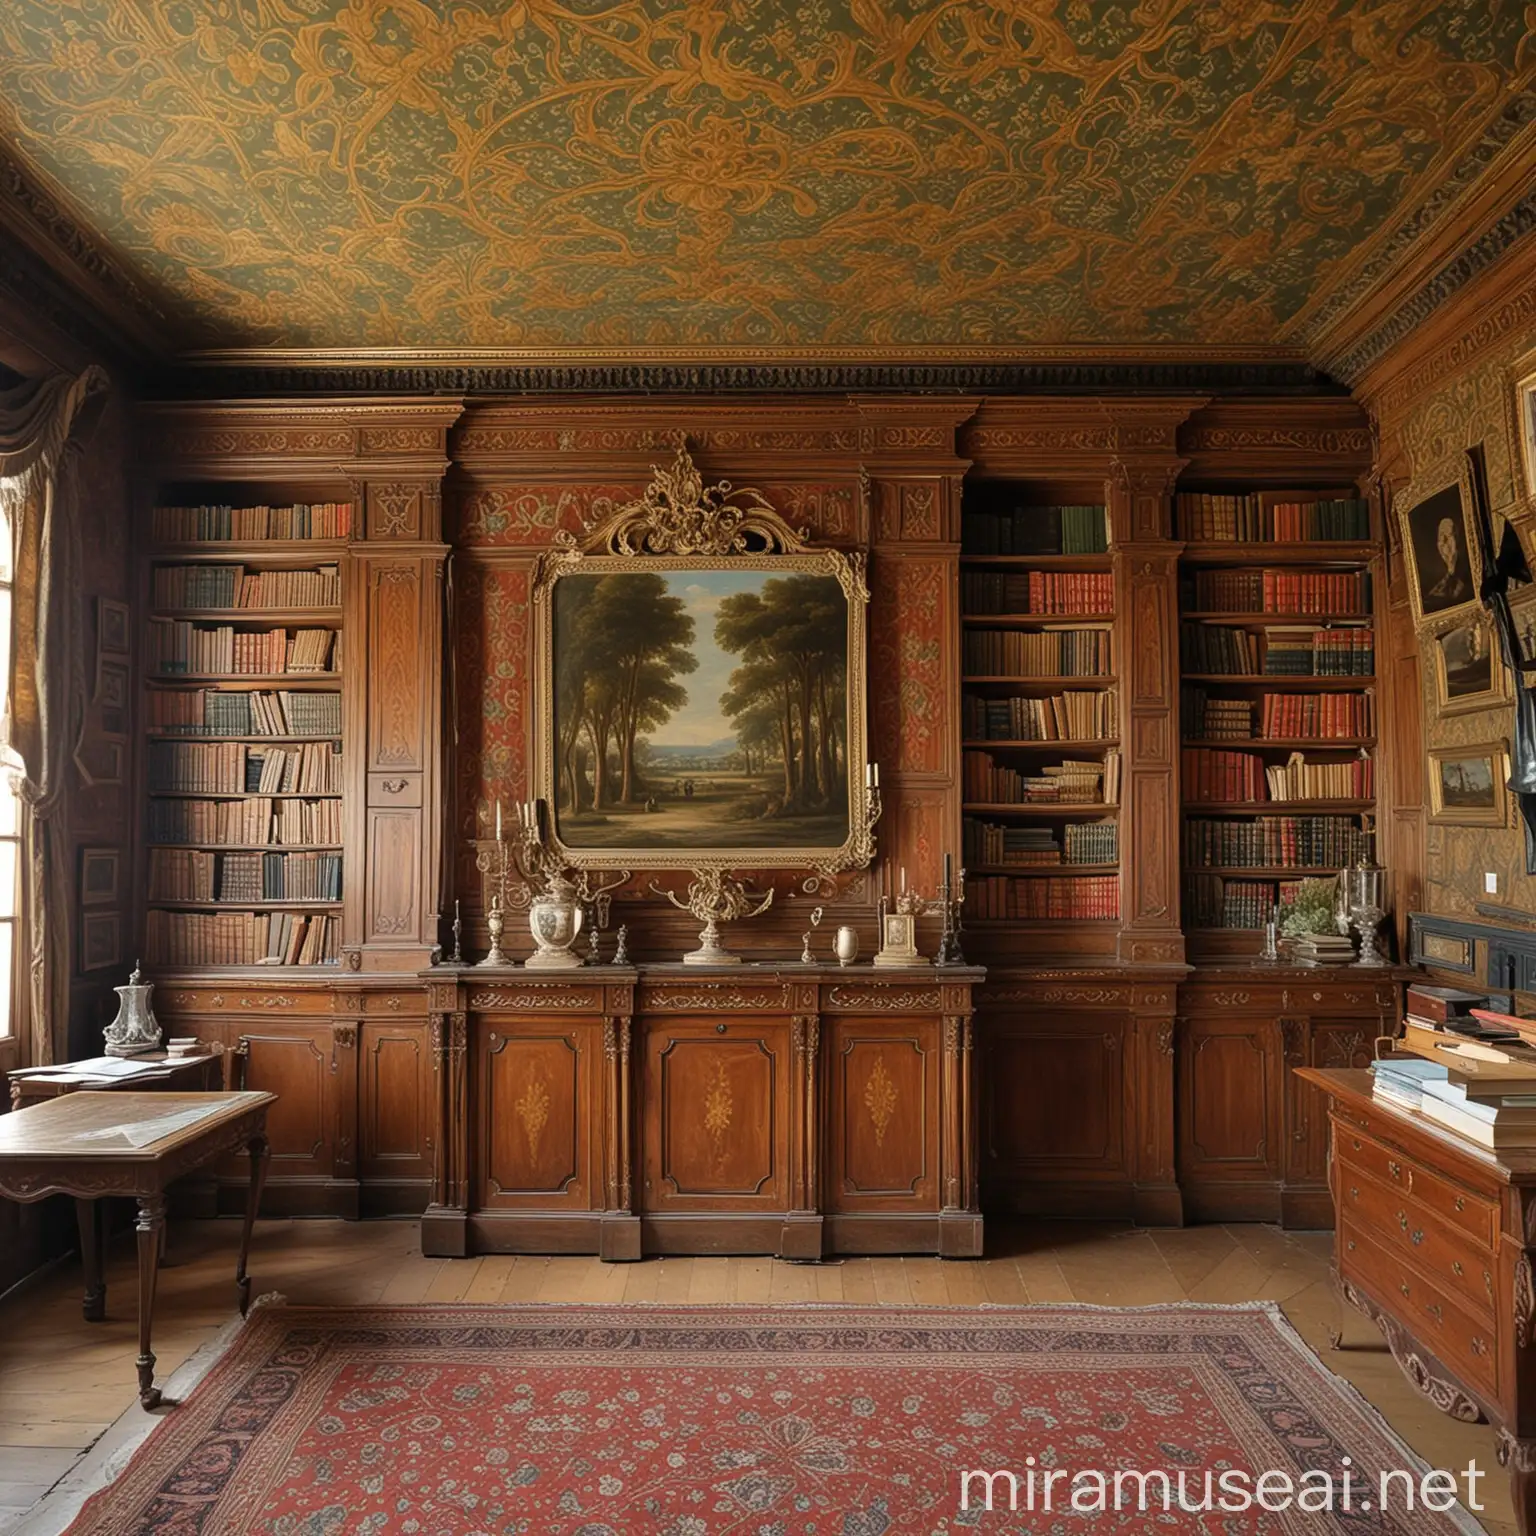 A big 19th century Victorian room with a huge Italian cassone, with fantastically-painted panels and tarnished gilt mouldings. There is a satinwood bookcase filled with schoolbooks. On the wall behind the bookcase is hanging a ragged Flemish tapestry. It looks expensive but not too fancy. There are paintings on the walls. 